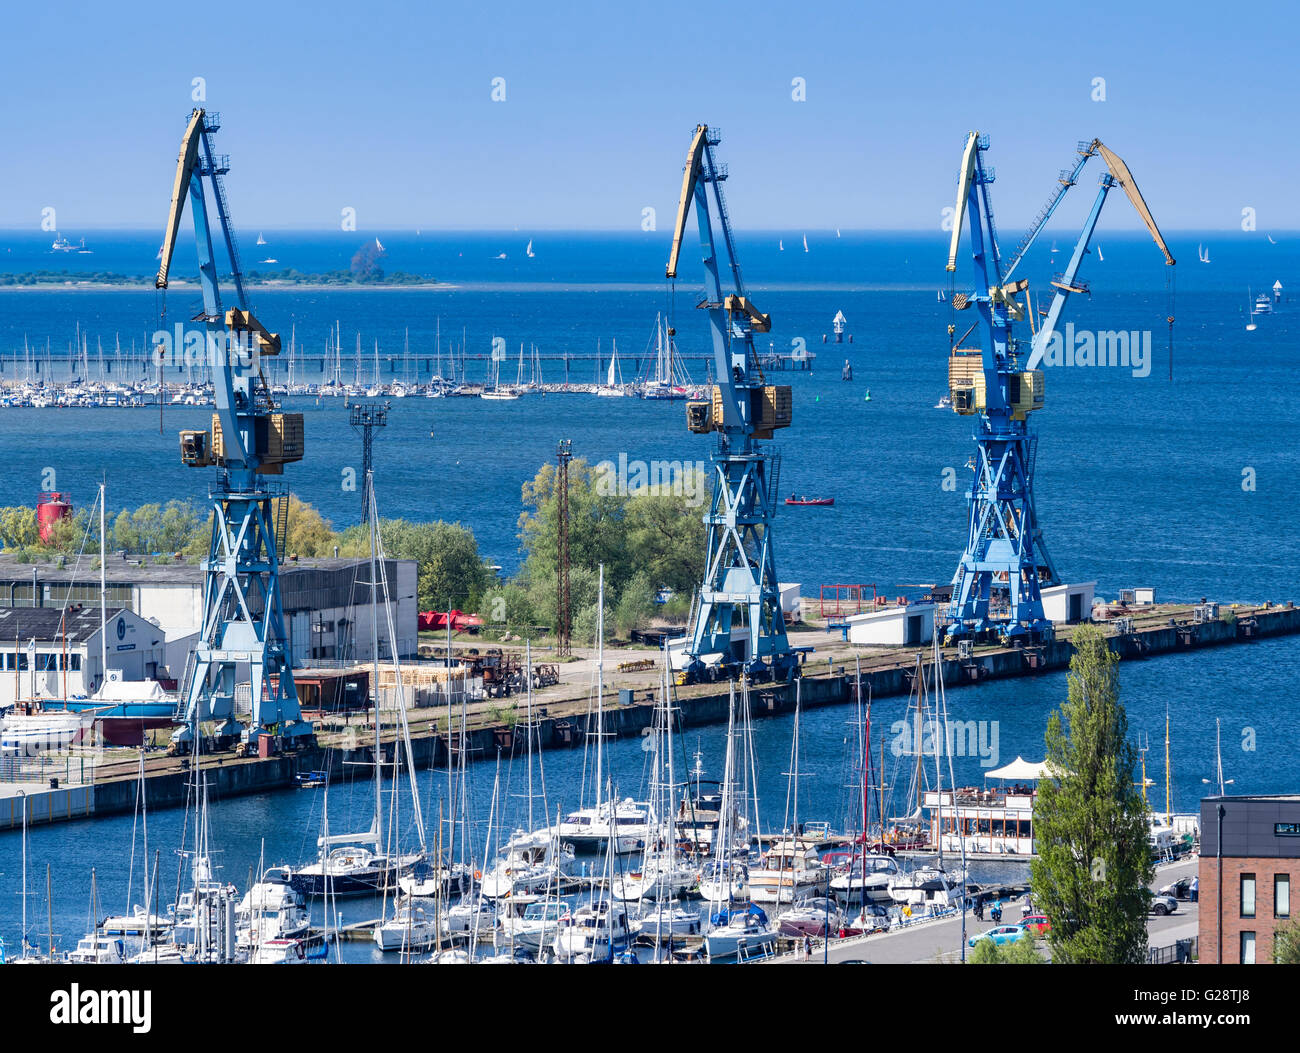 Cranes at the harbor, seen from platform of St. Georgen church, Wismar, Germany. Stock Photo